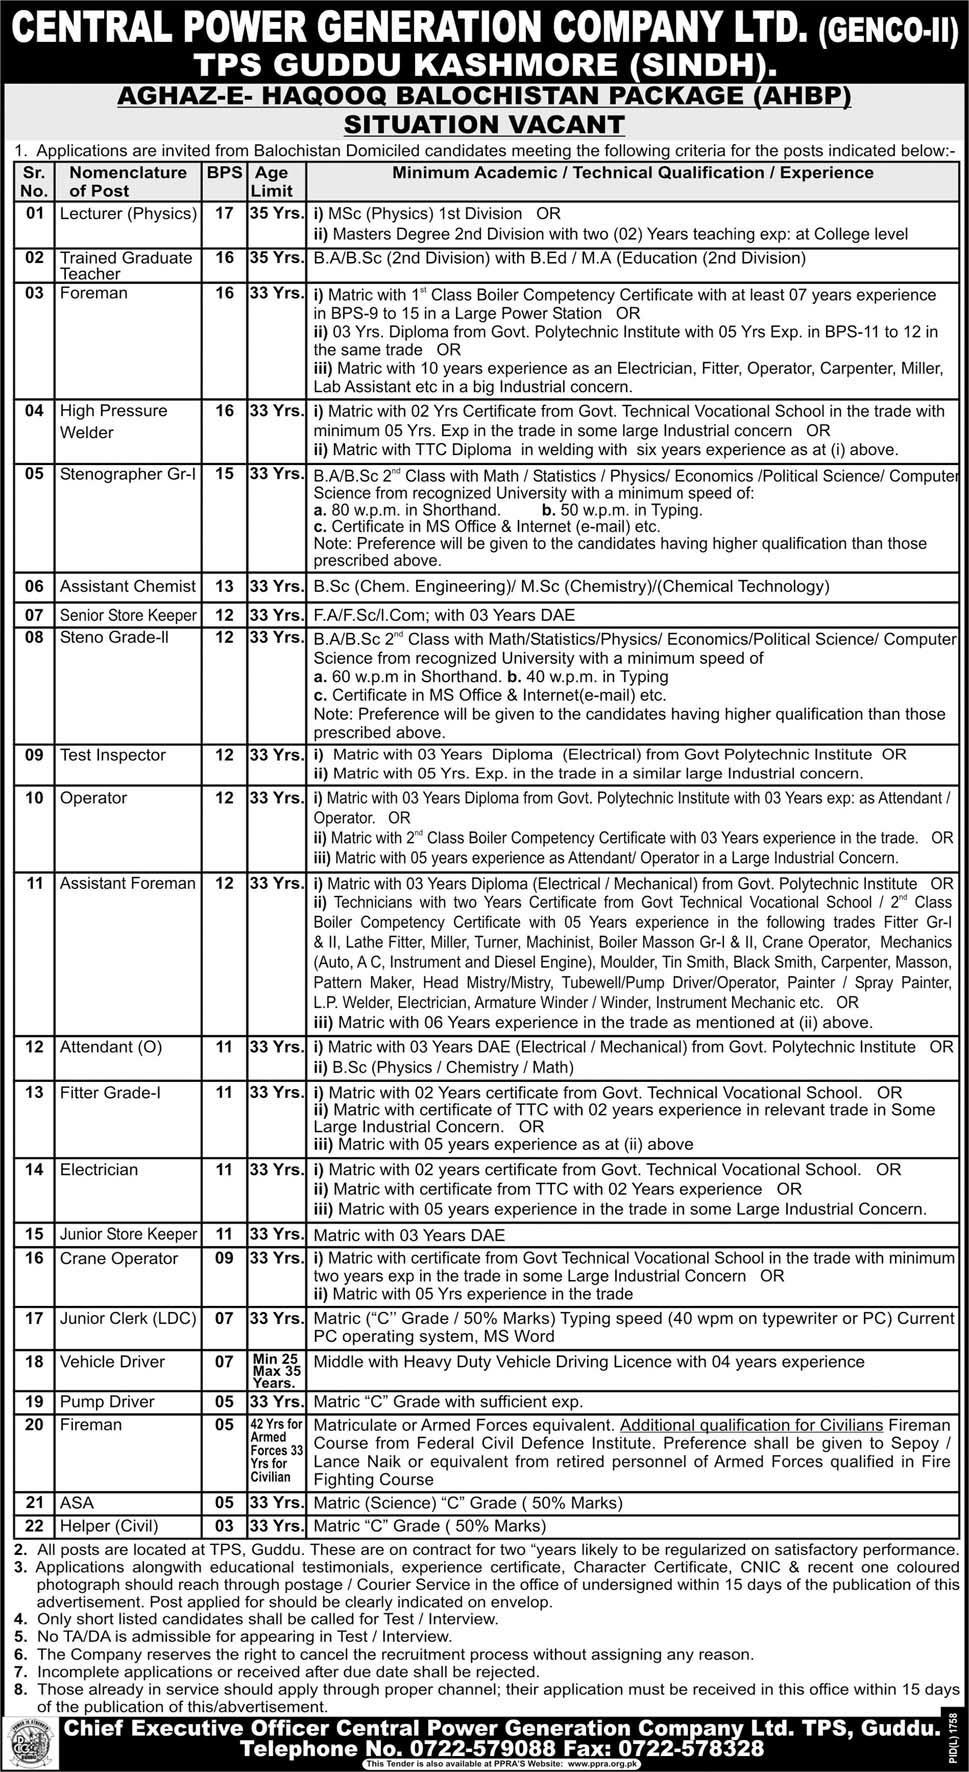 Central Power Generation Company Ltd Jobs Opportunity